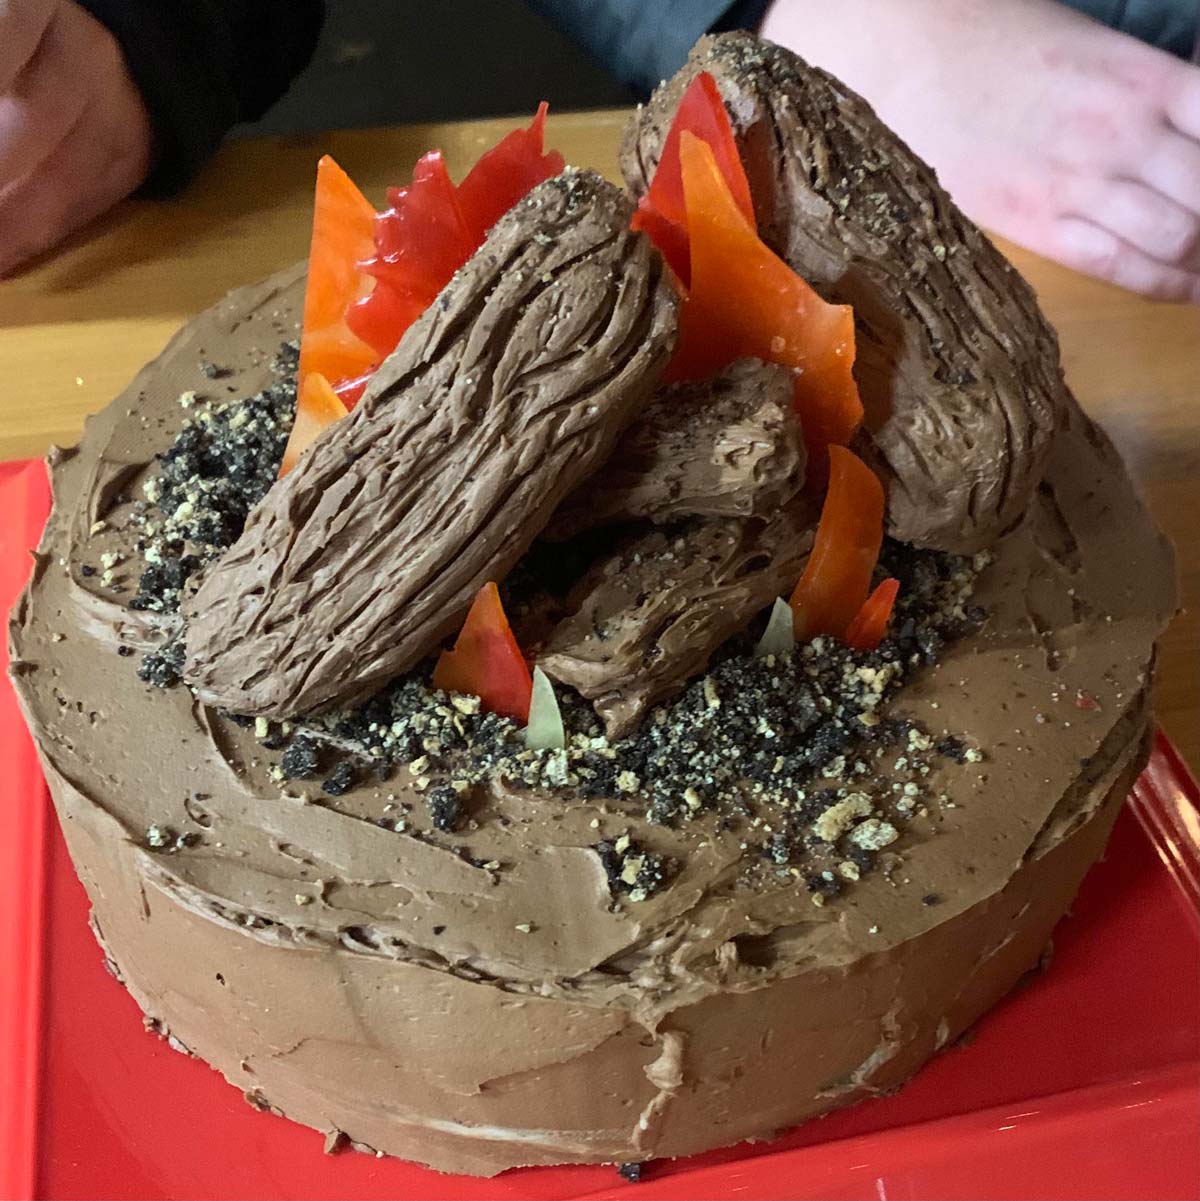 I made my friend a campfire cake for her birthday but the more I look at it, the more it looks like a flaming pile of poop